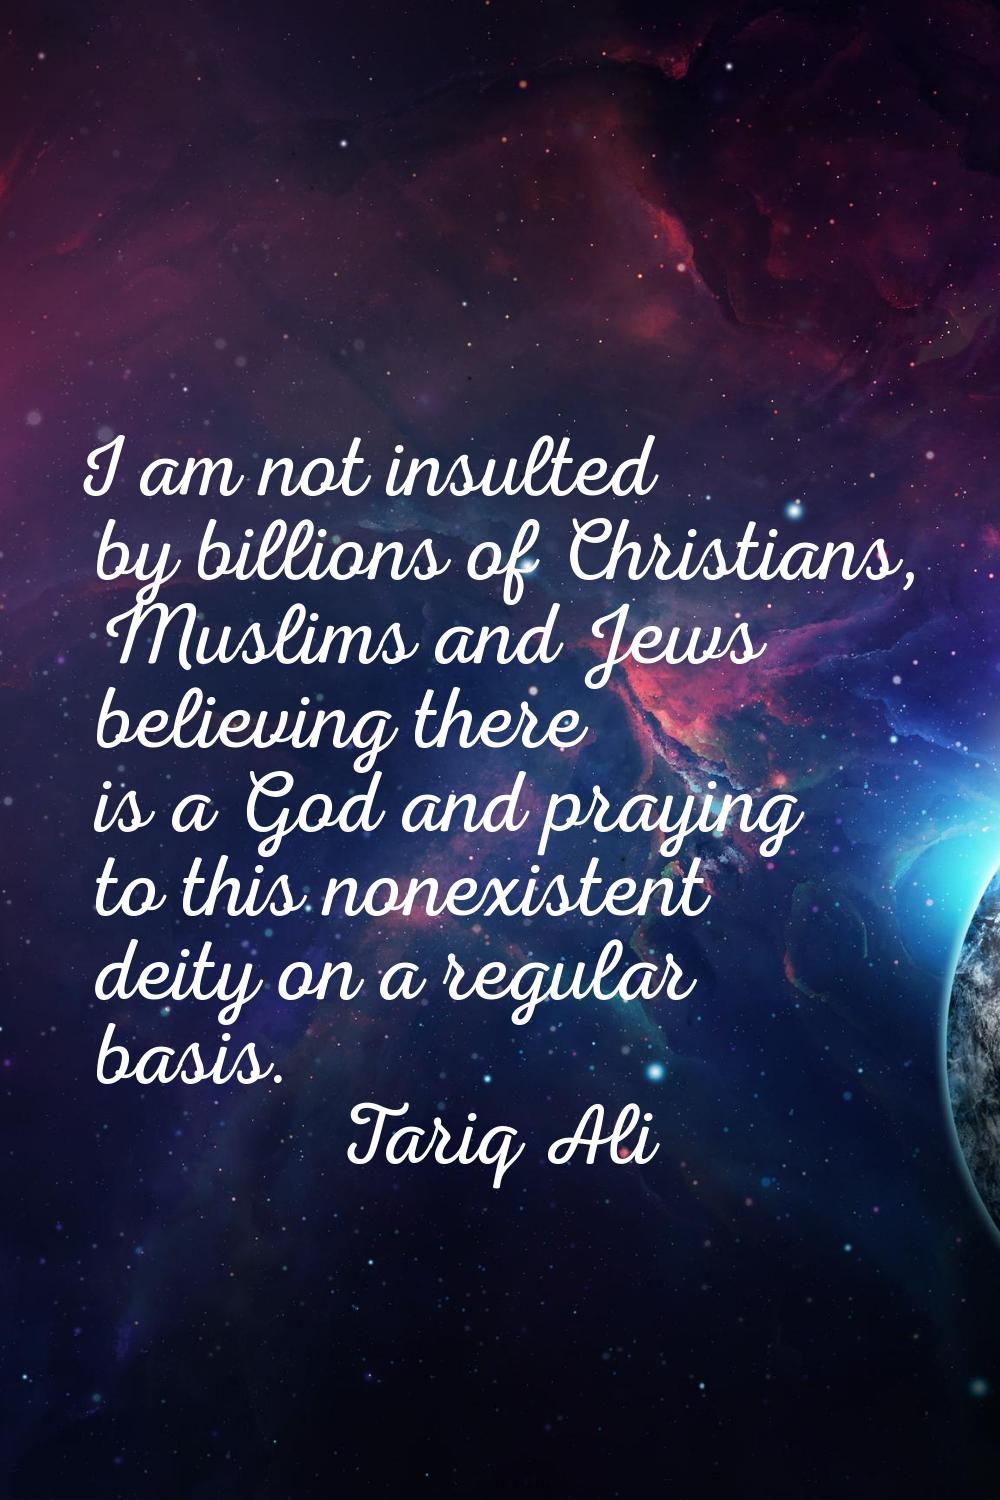 I am not insulted by billions of Christians, Muslims and Jews believing there is a God and praying 